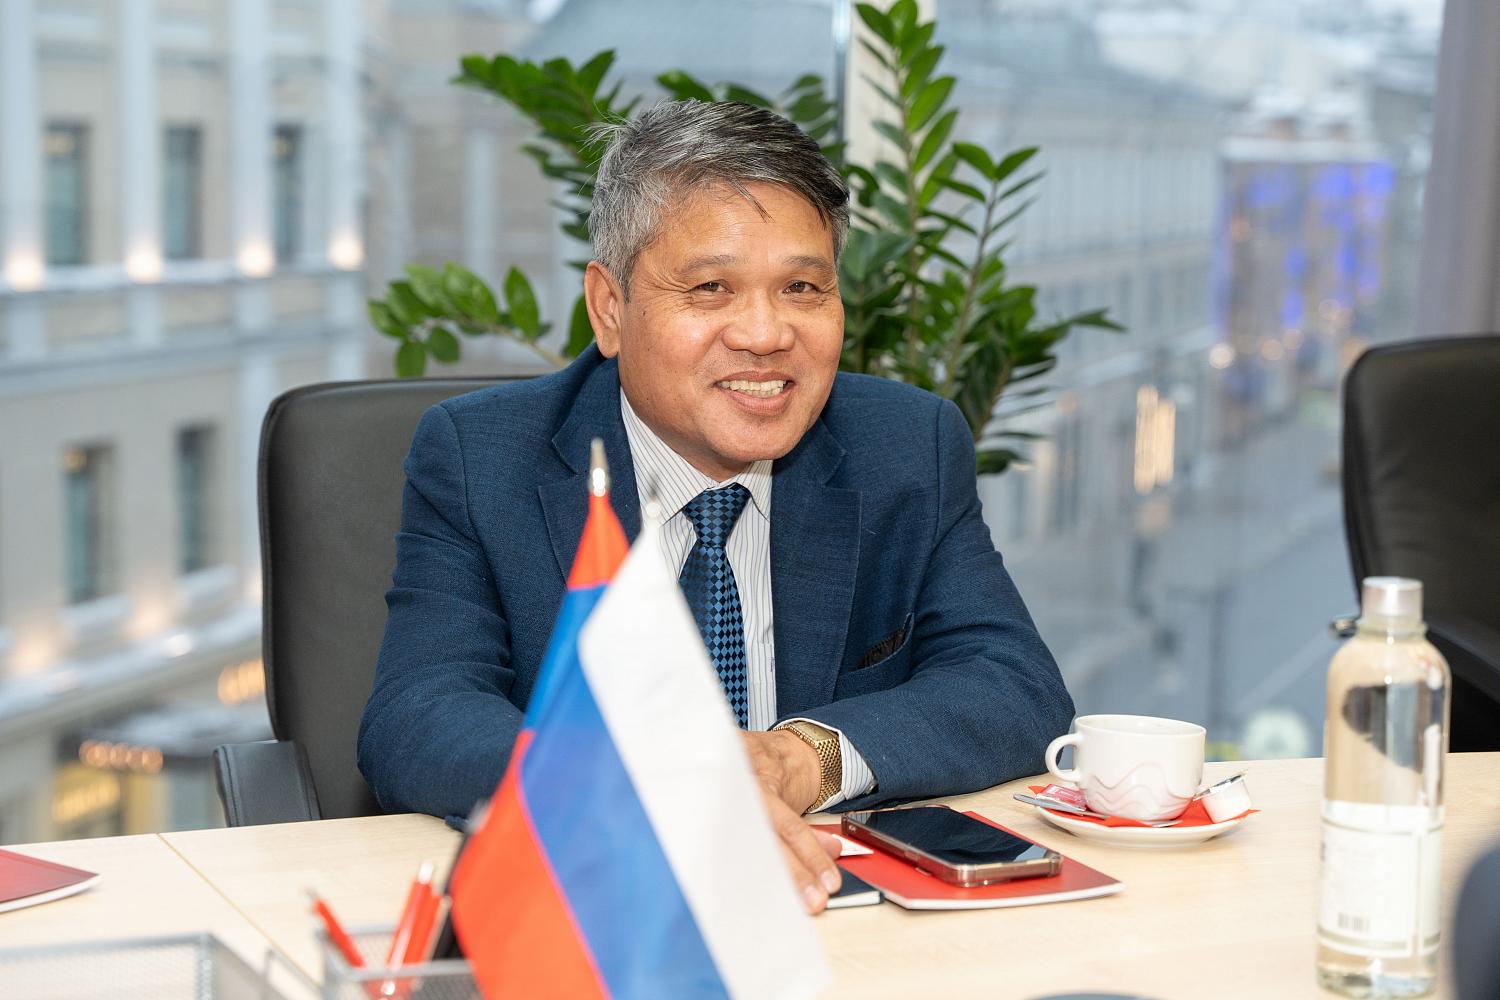 Moscow and Laos entrepreneurs have a mutual business interest